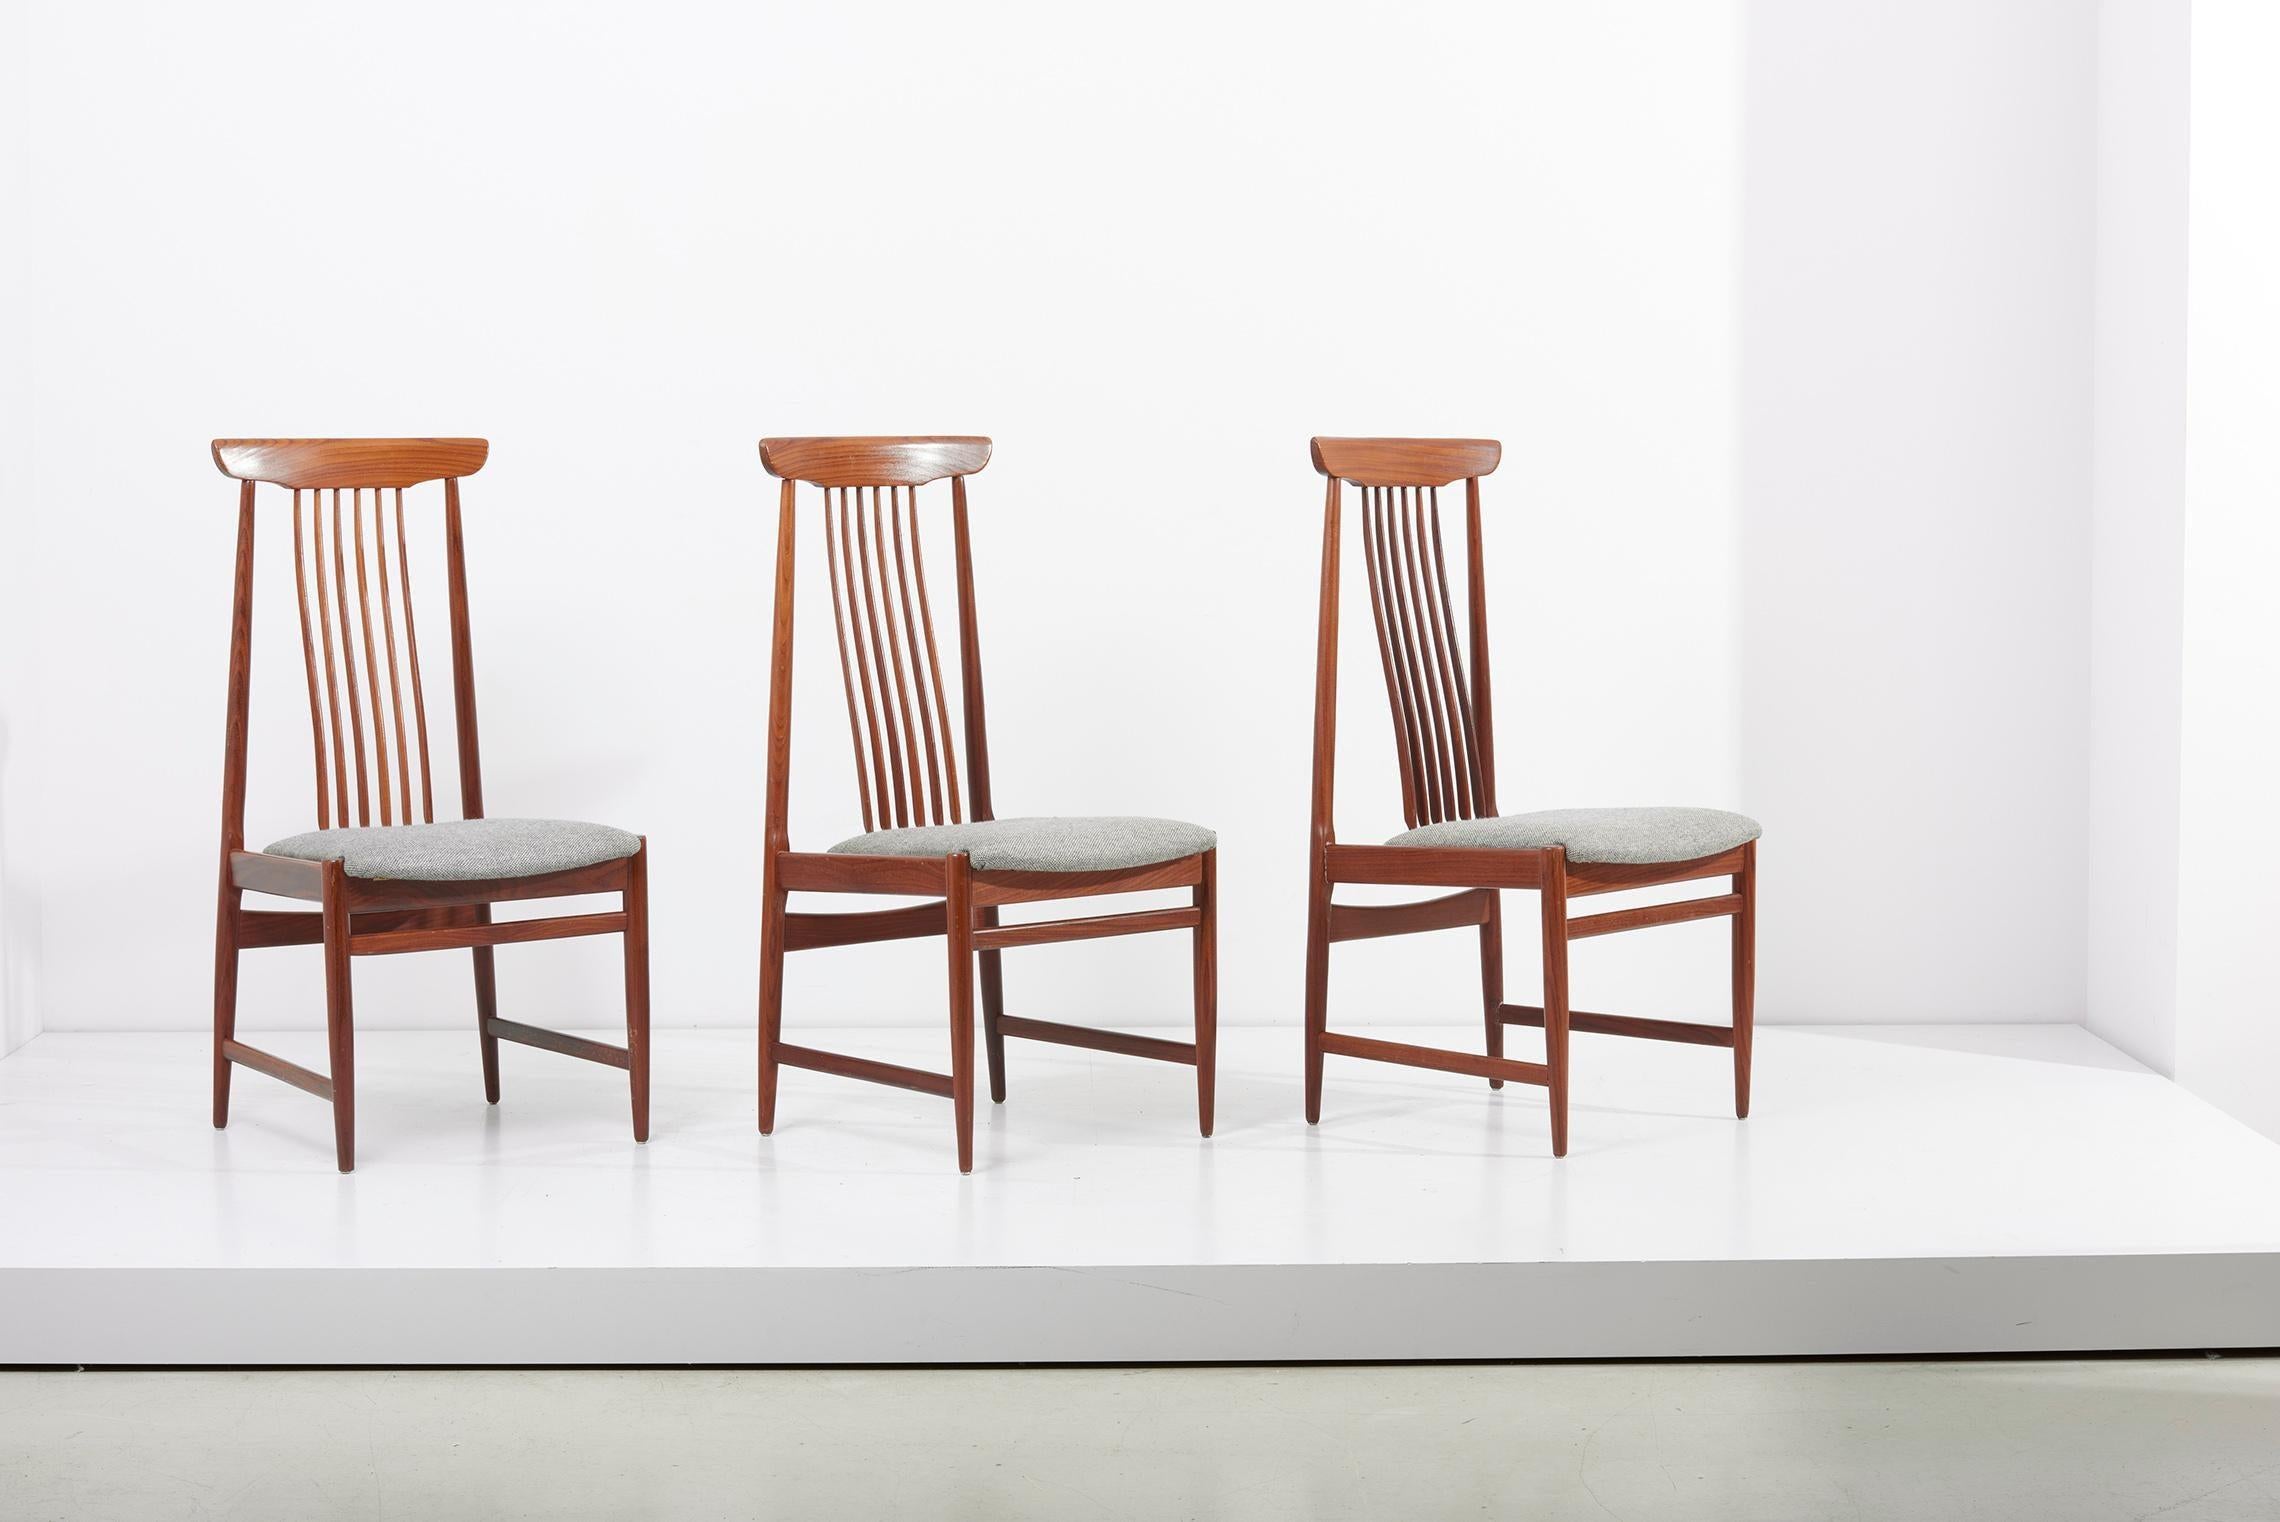 European Spindle Back Dining Chairs, Denmark, 1960s For Sale